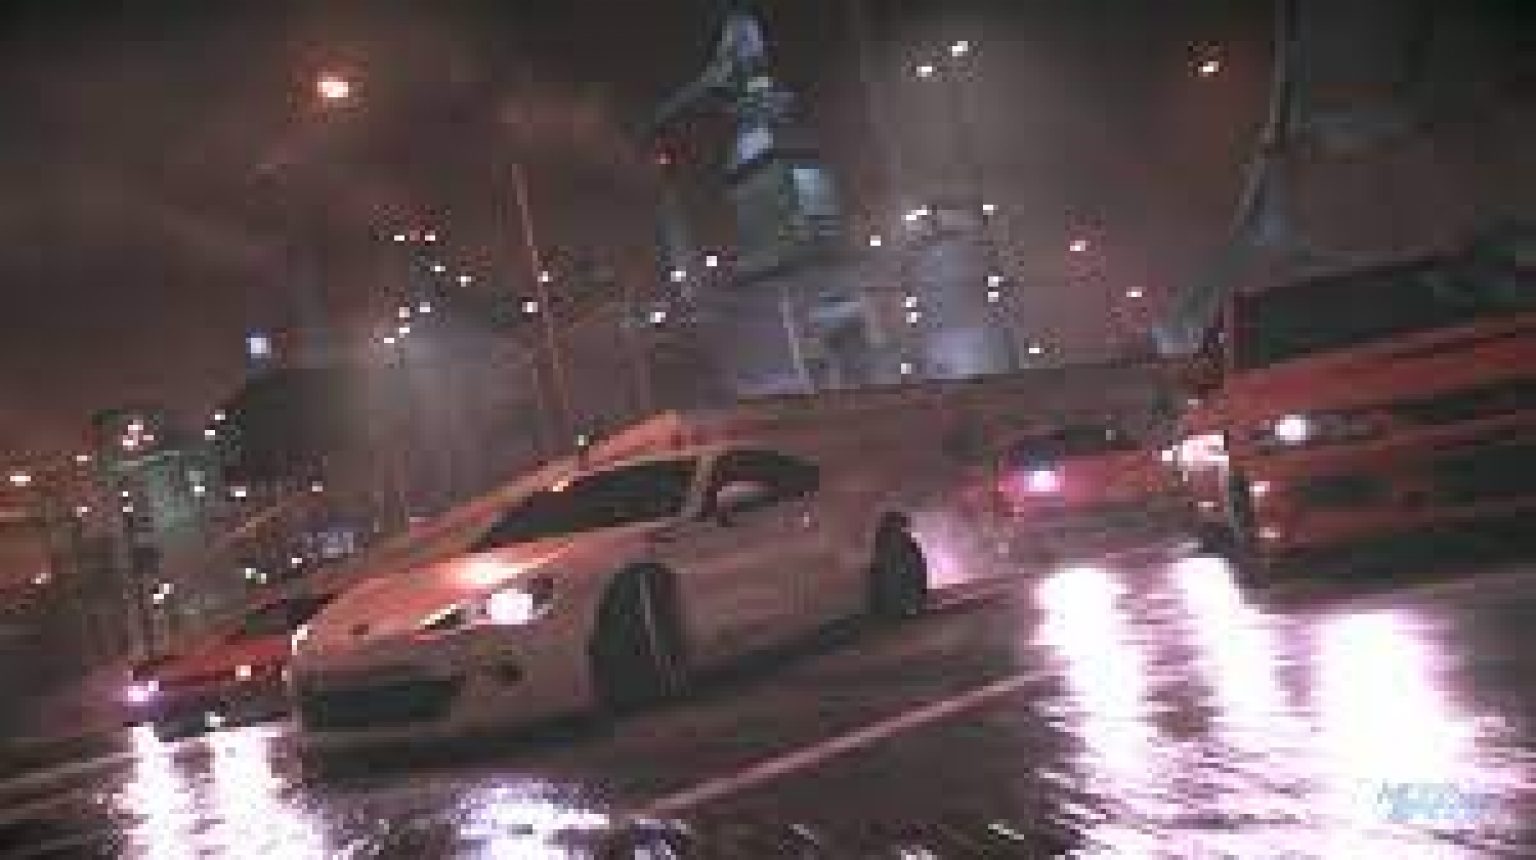 need for speed 2015 pc game windows 7 free download